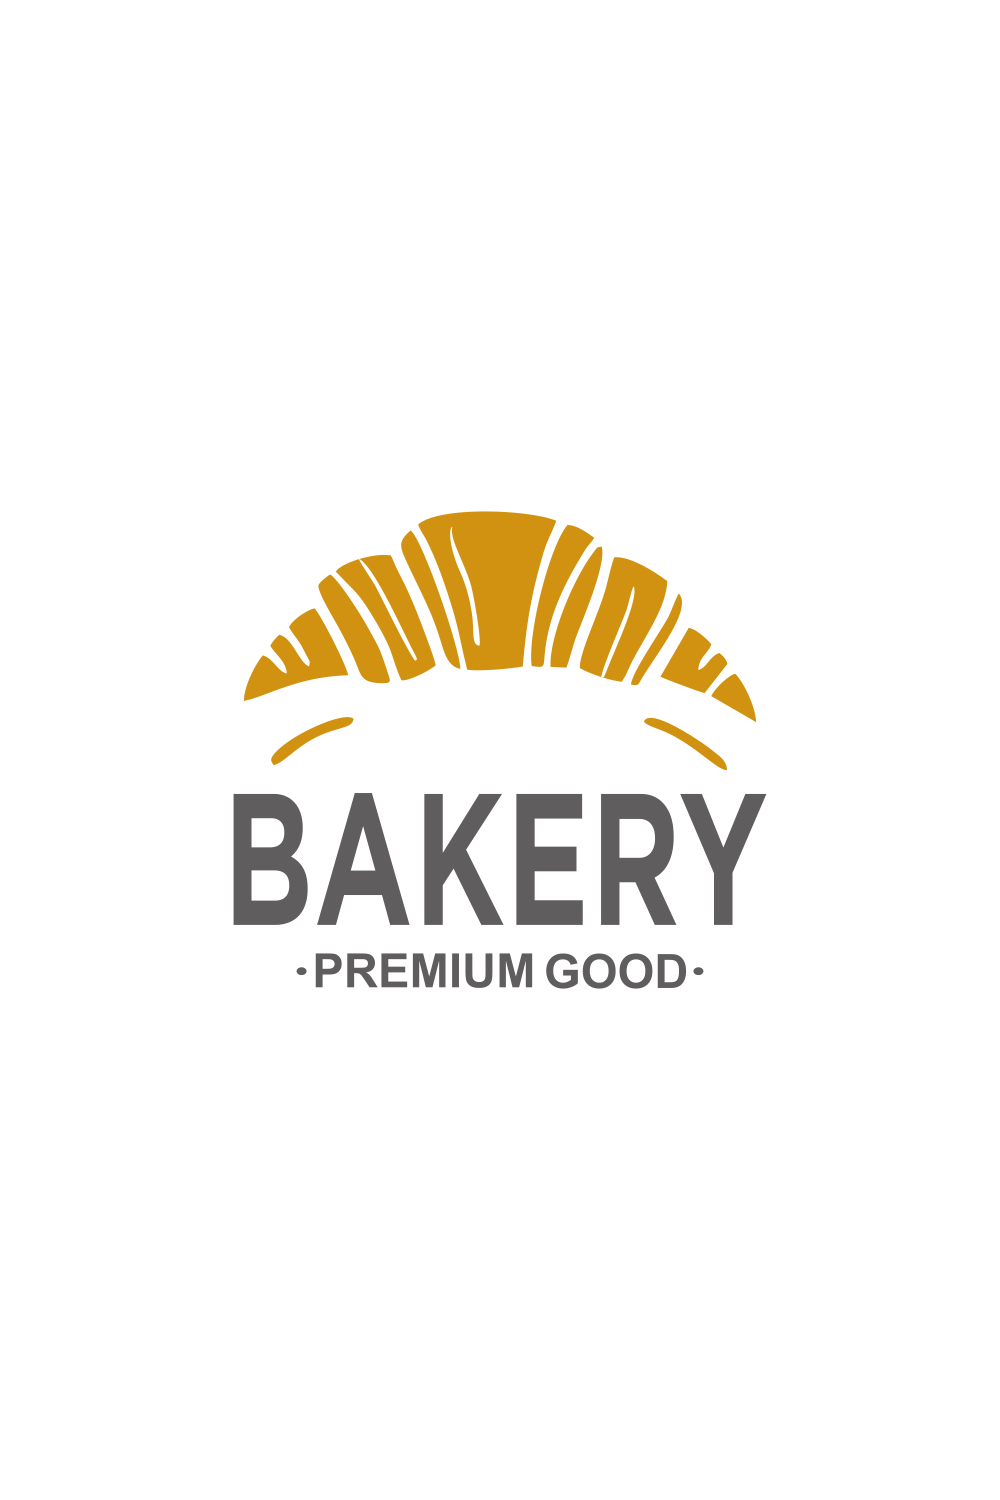 bakery icon design template only 9$ pinterest preview image.